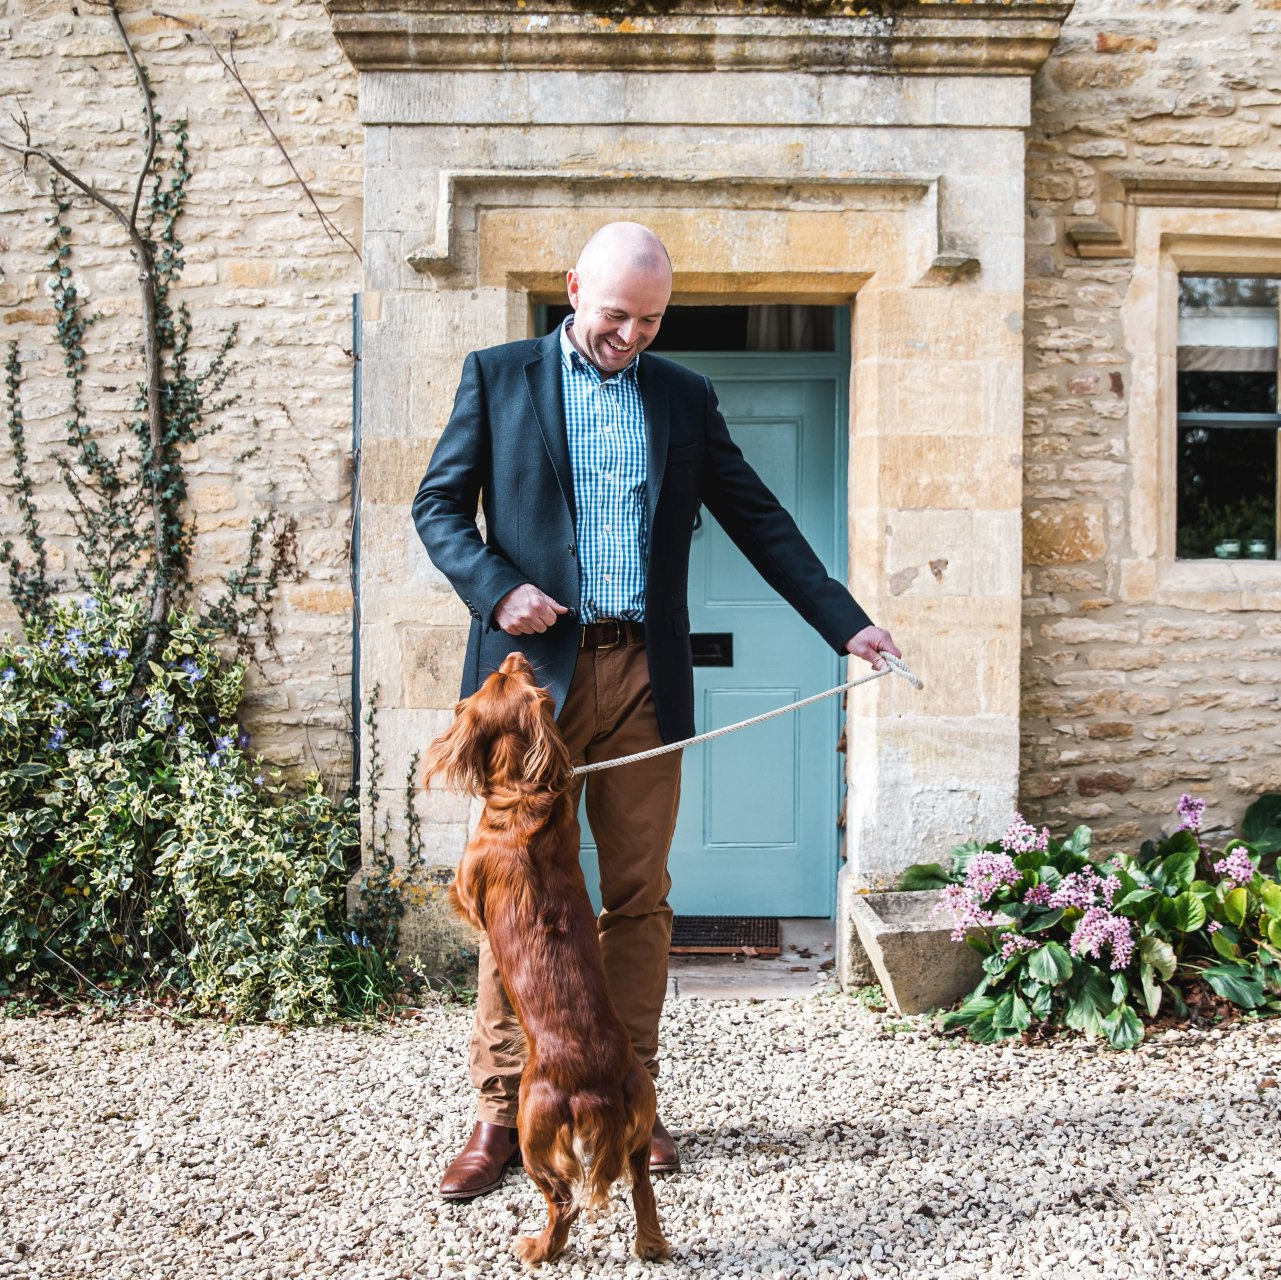 Edward from Cotswold Tiger, The Second Home Company with red spaniel on lead